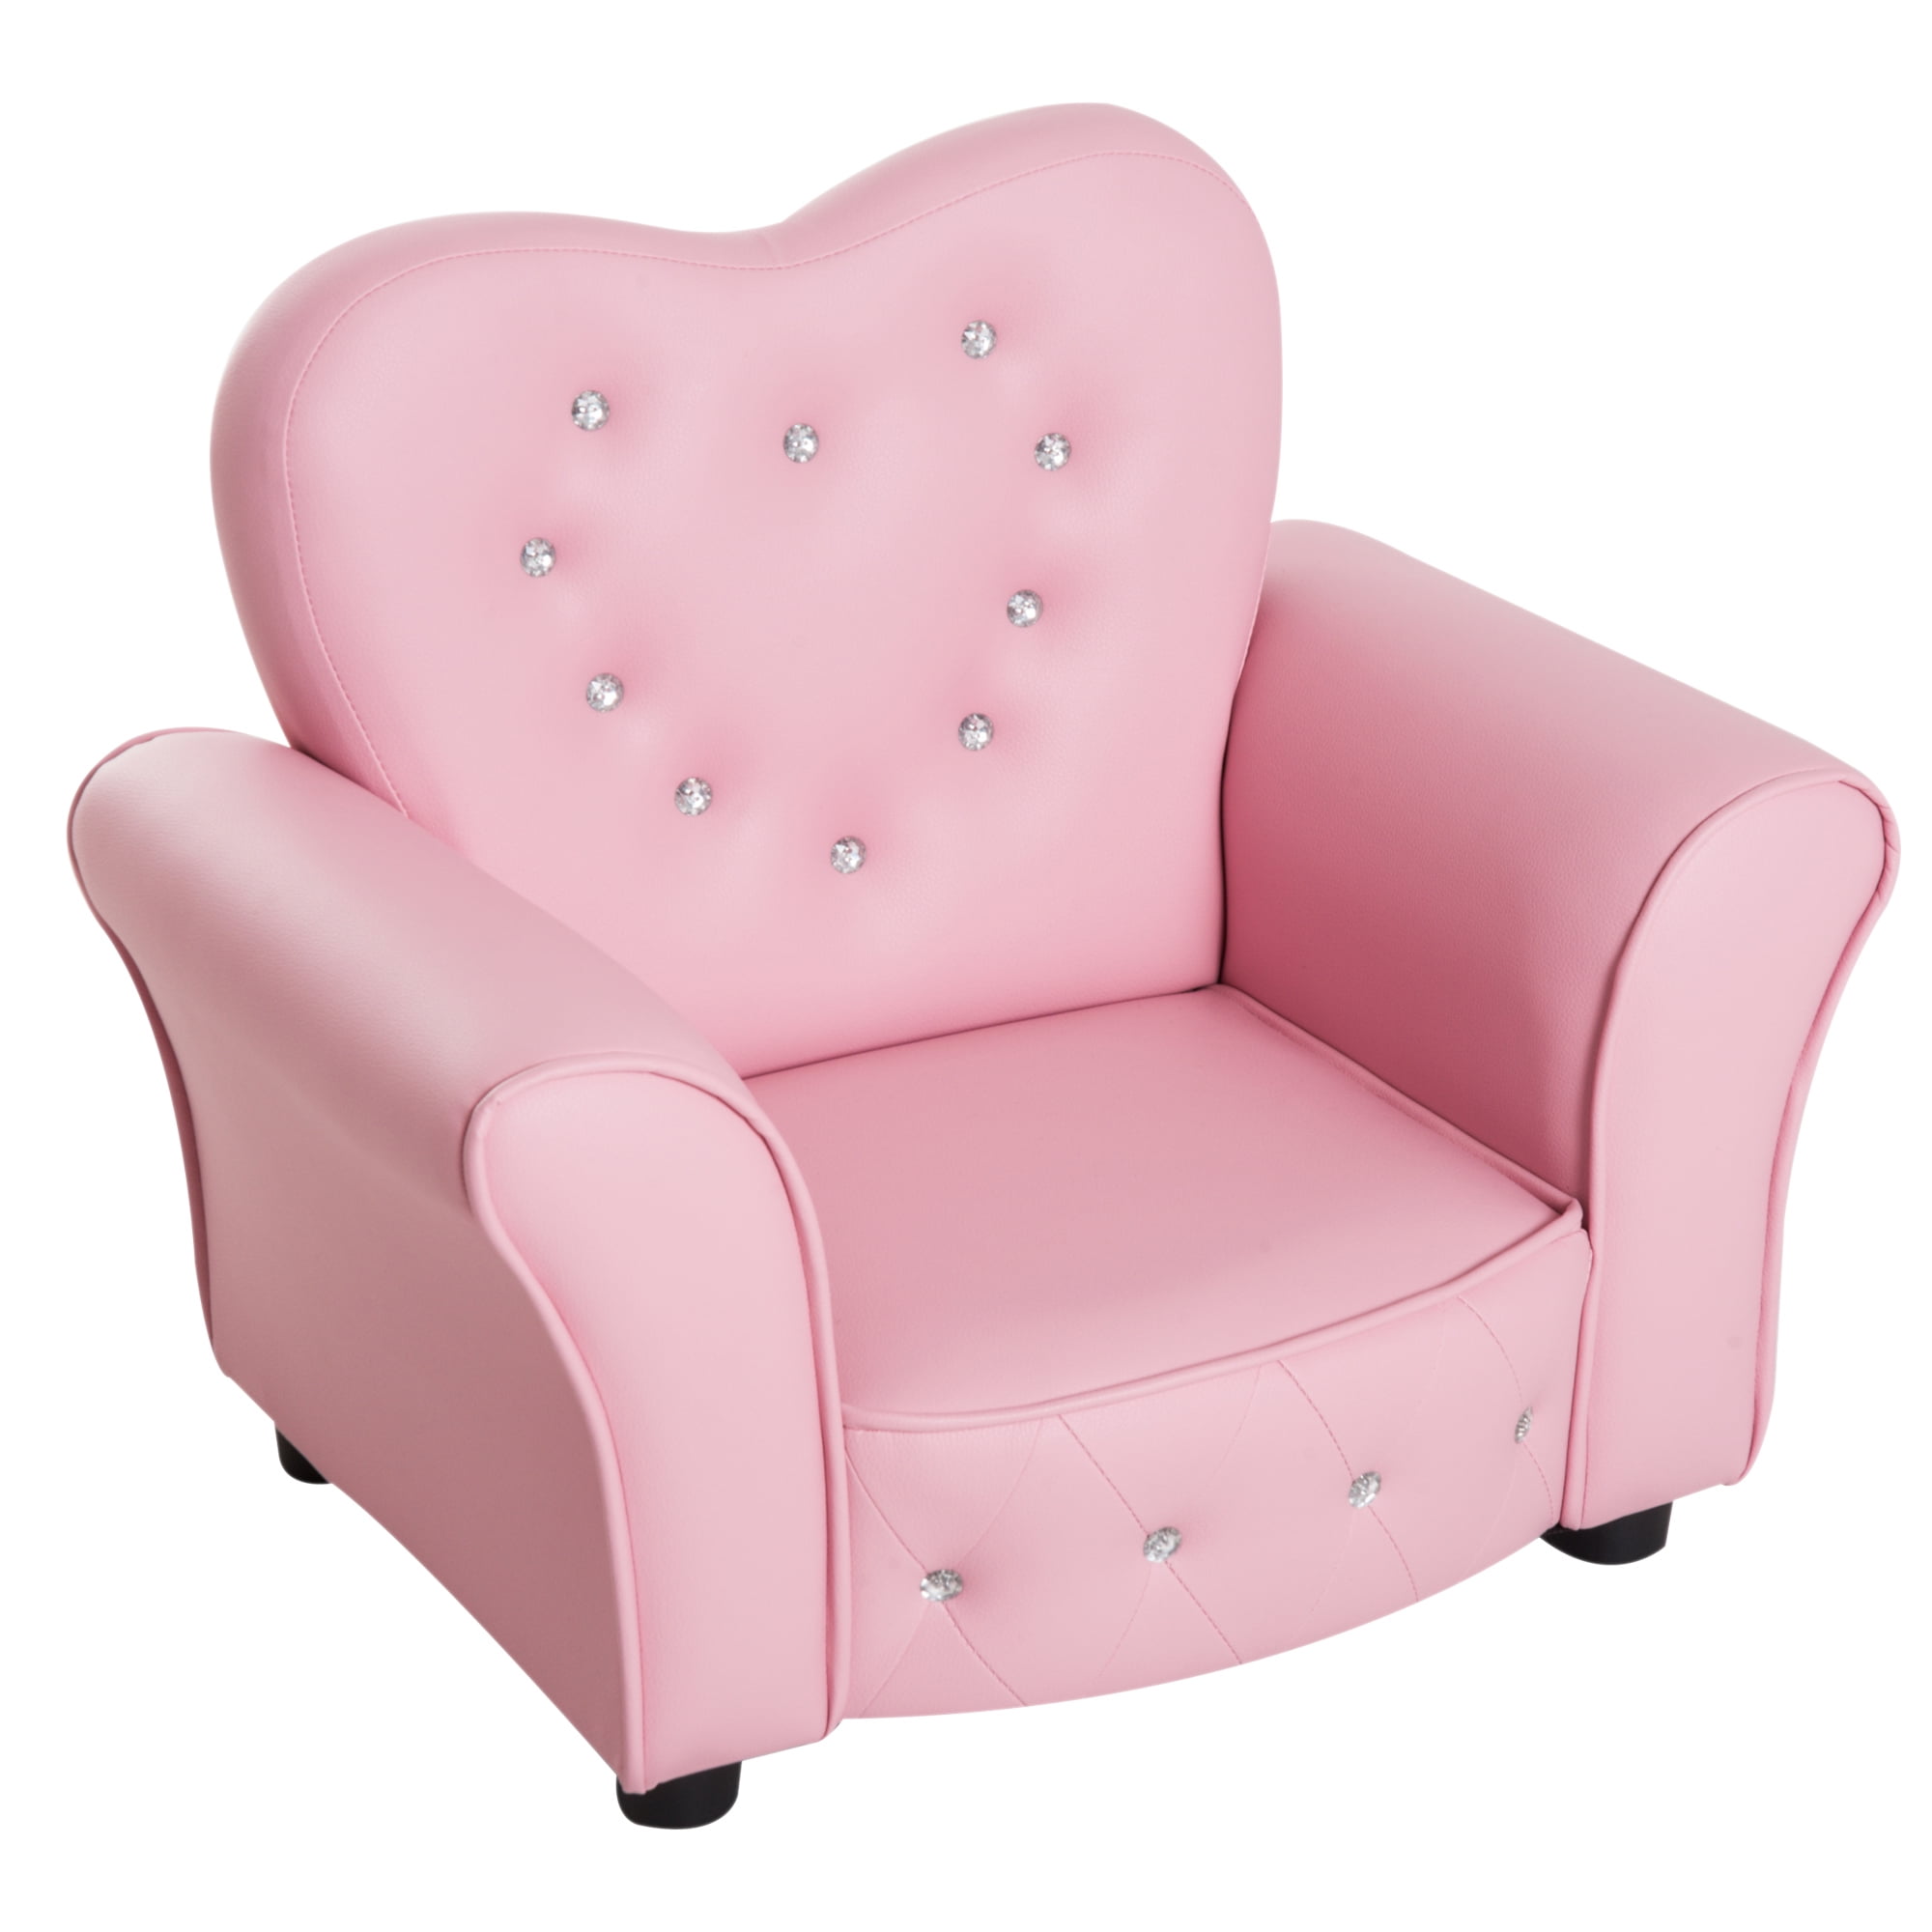 Qaba Tufted Upholstered Sofa Chair for Kids, Princess Couch Furniture for Preschool Child Pink